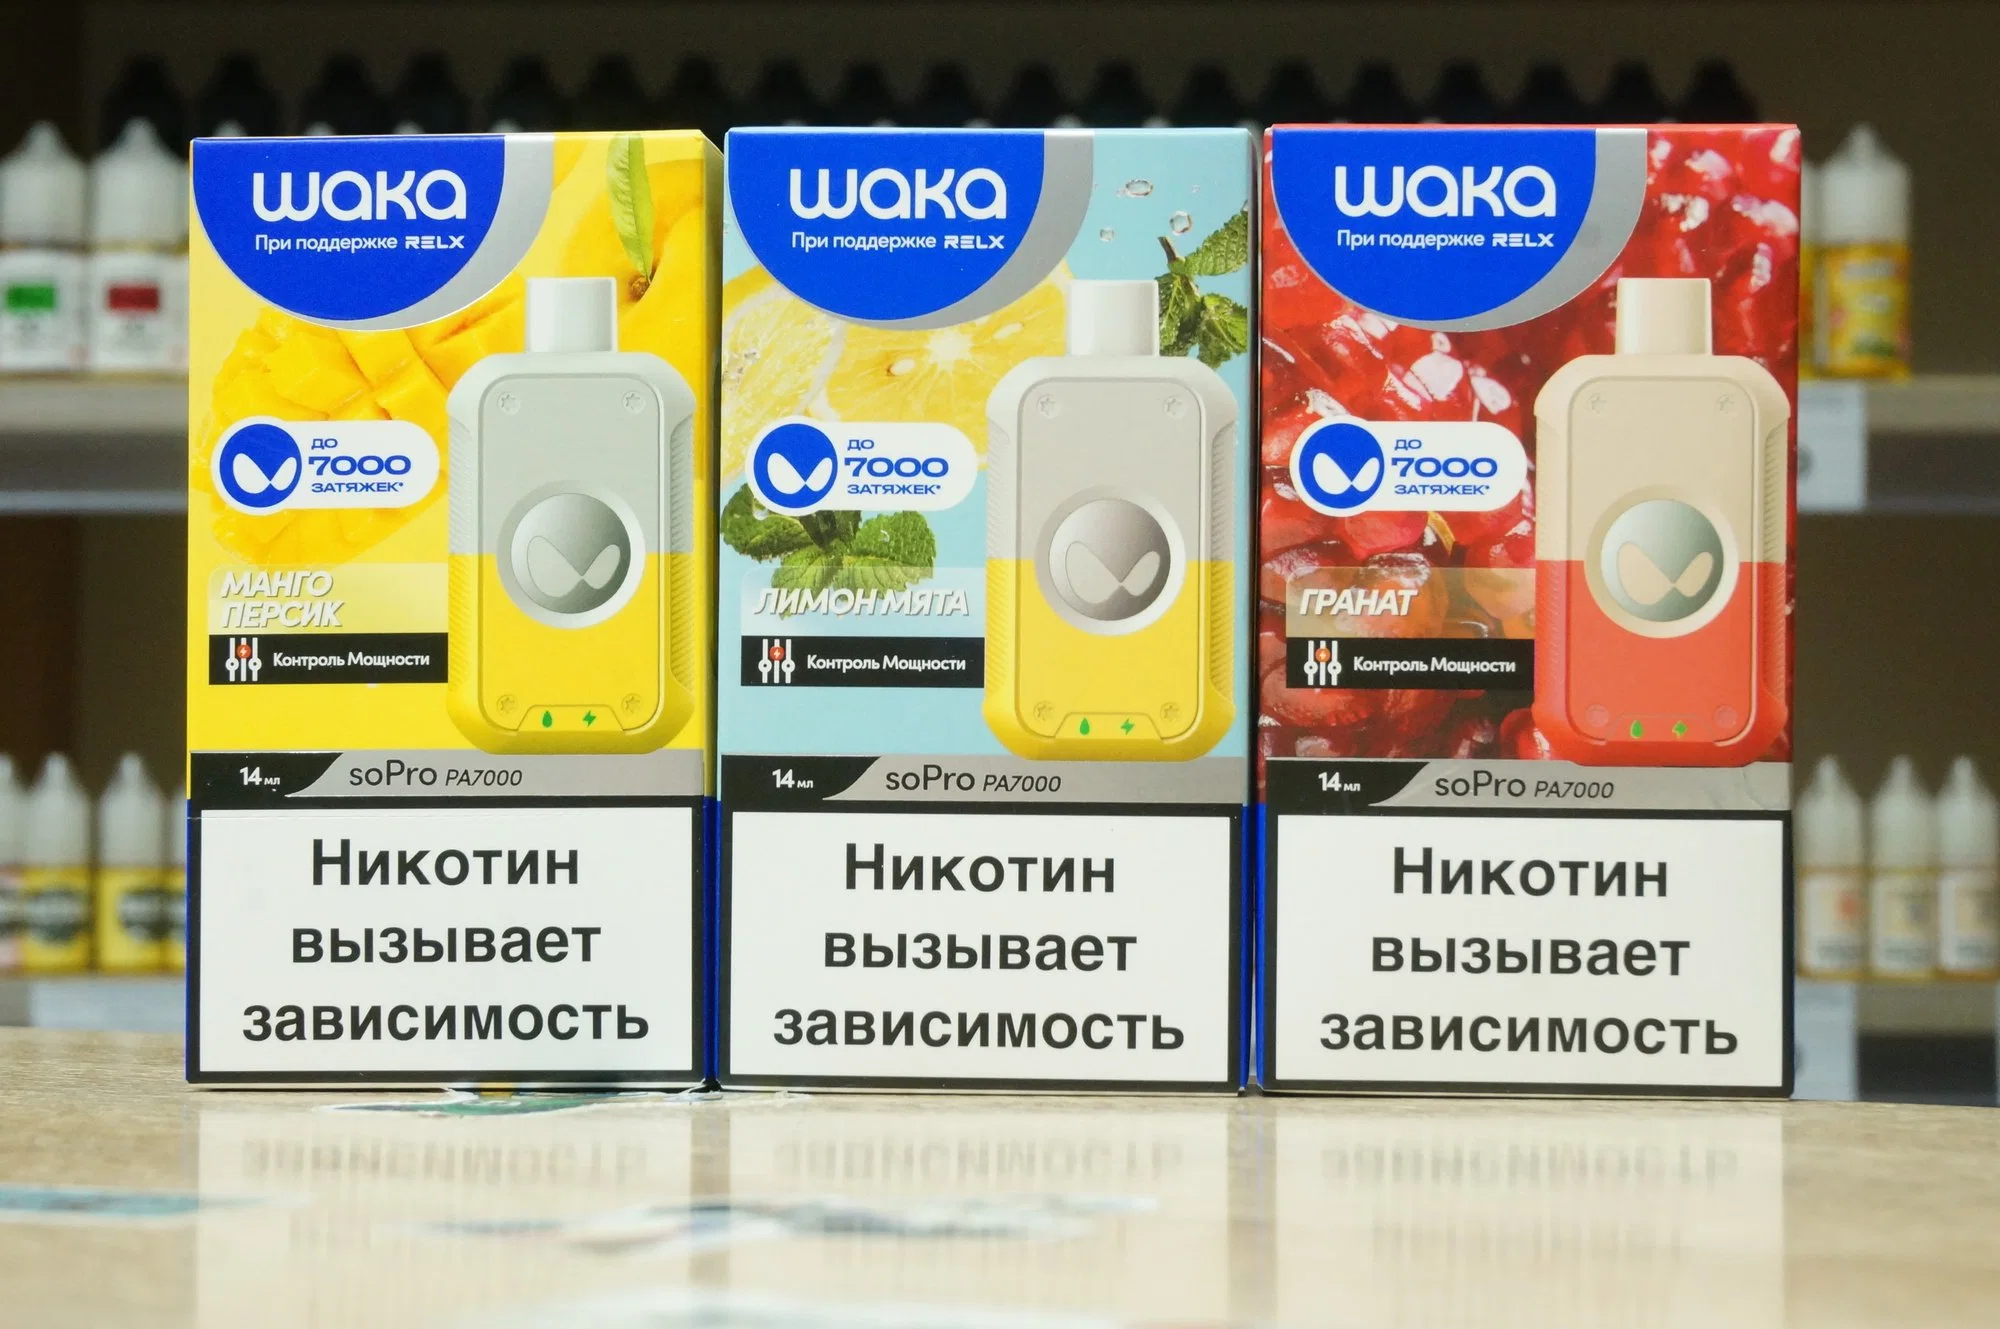 Original Factory Waka Vape Sopro 7000 Puffs Wholesale/Supplier Disposable/Chargeable Electronic Cigarette